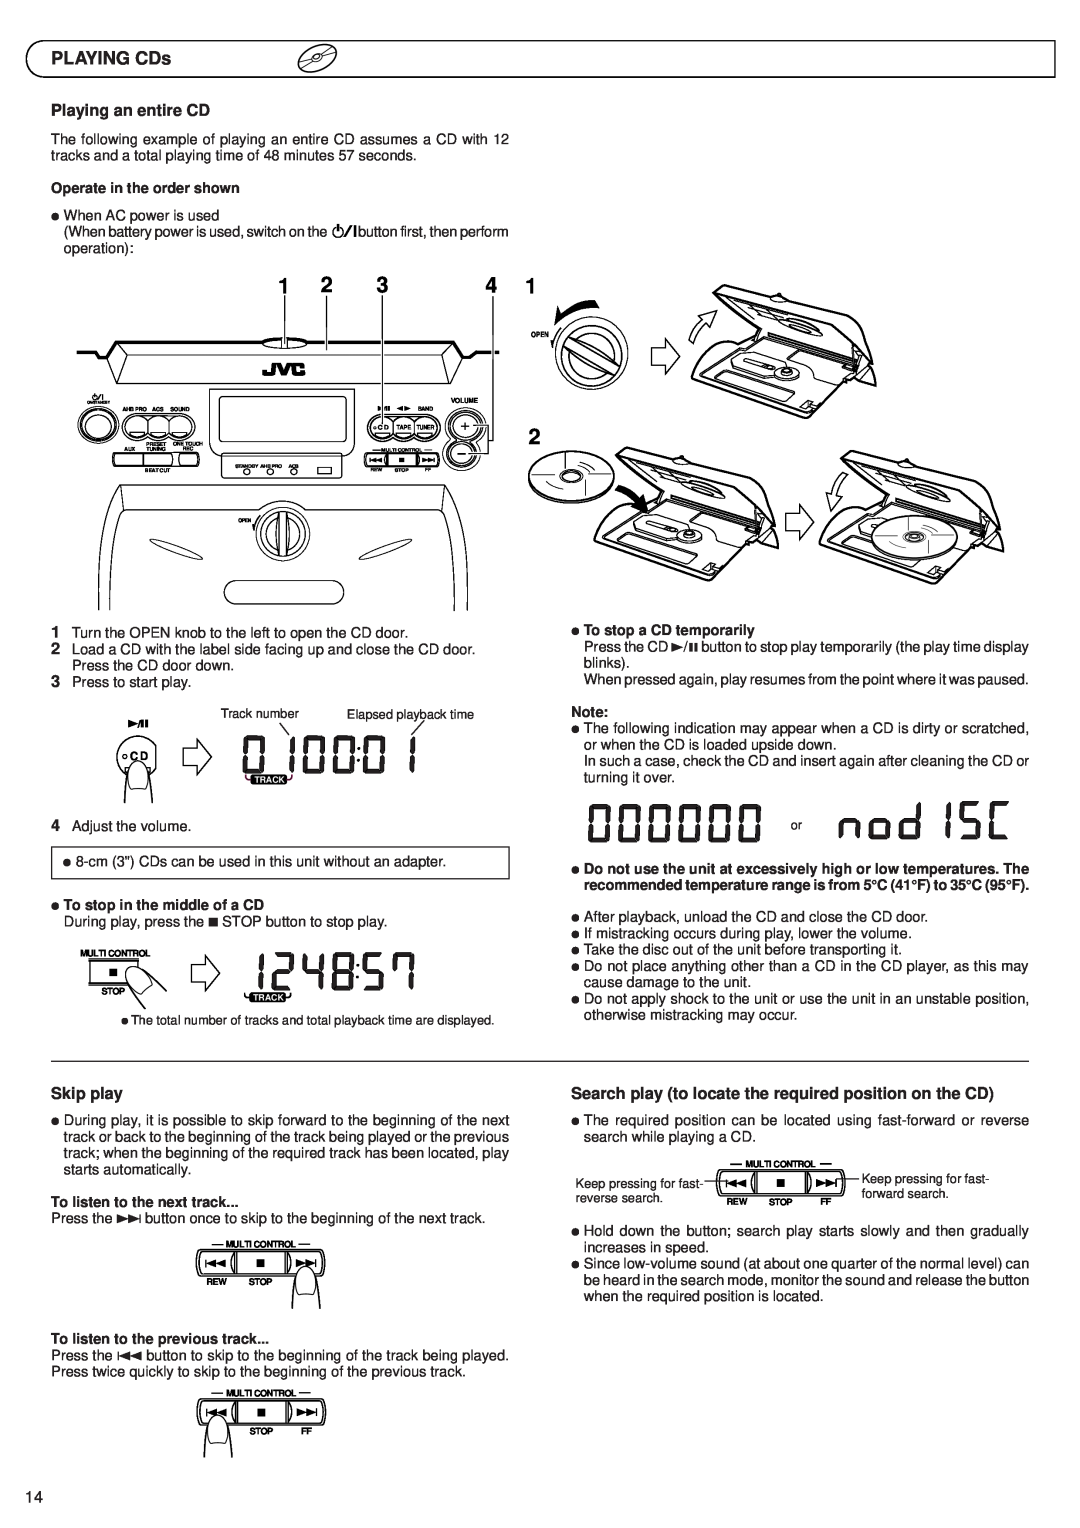 JVC RV-B55 GY manual PLAYING CDs, Operate in the order shown, ÖTo stop in the middle of a CD, ÖTo stop a CD temporarily 